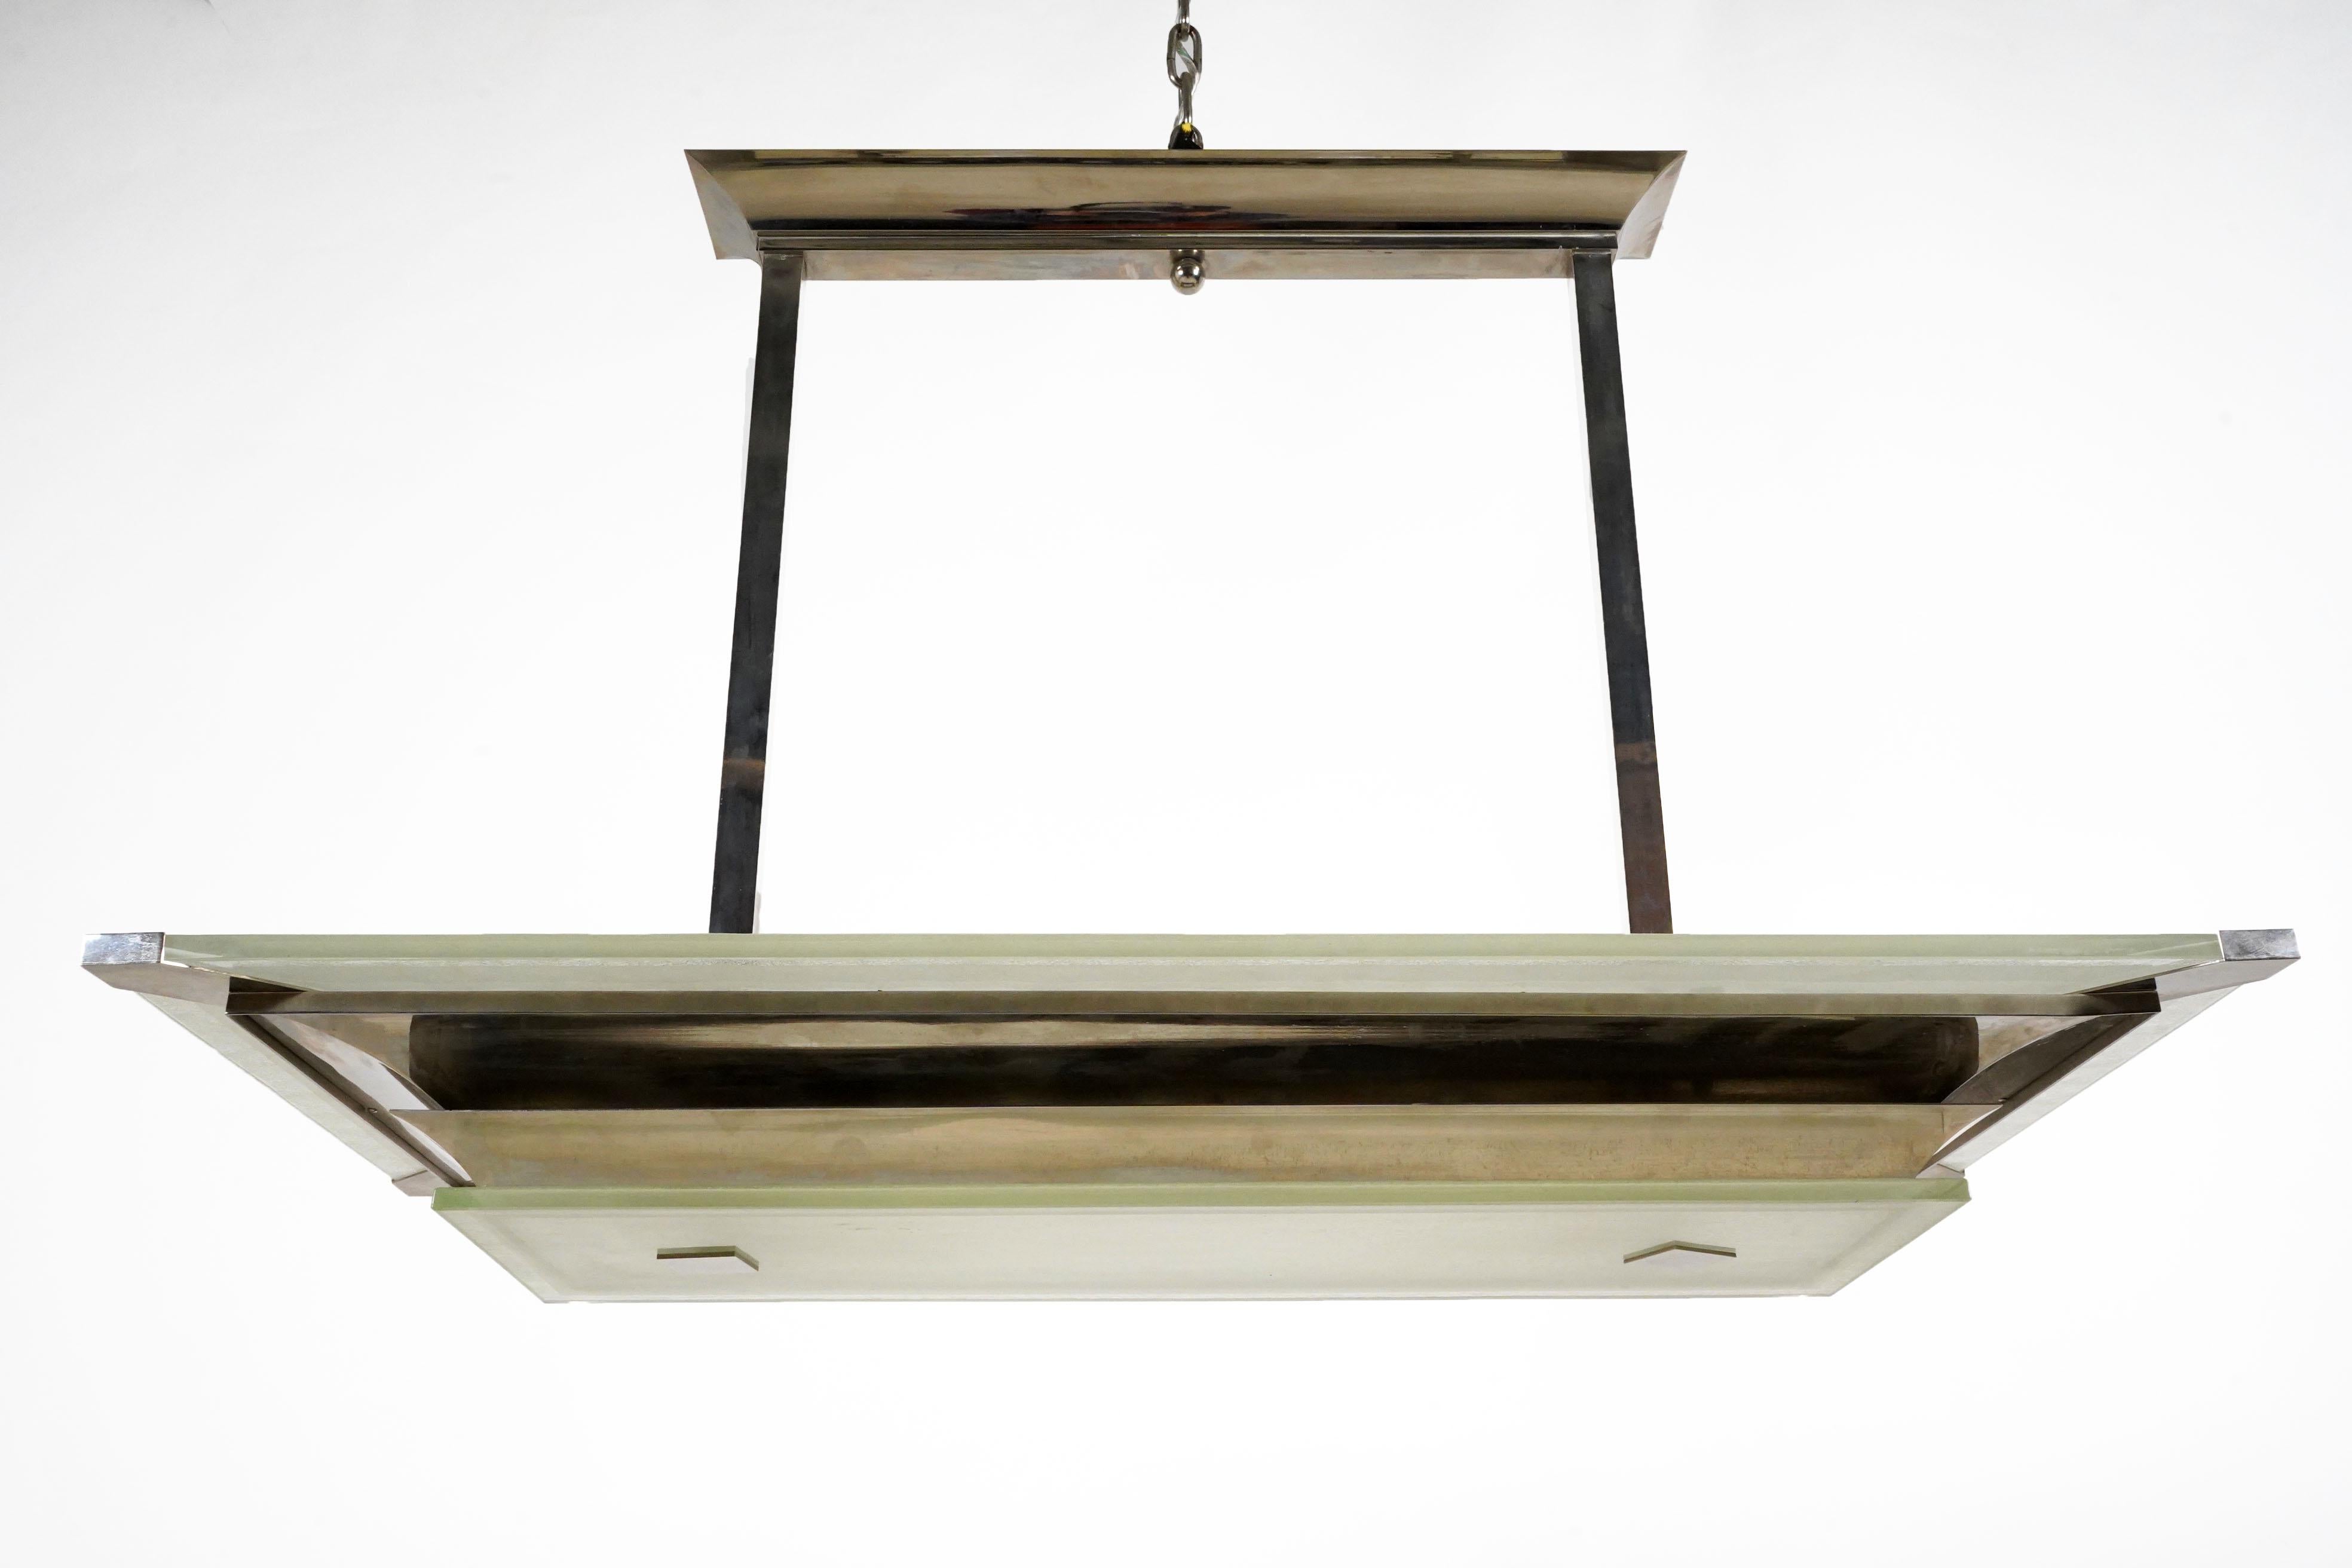 This stylish chrome and steel chandelier features dramatic sculpted curves and thick glass plates.  All parts are original -the two-level rectangular lantern frame, sizable ceiling canopy and extending arms.  The frame is made from multiple segments